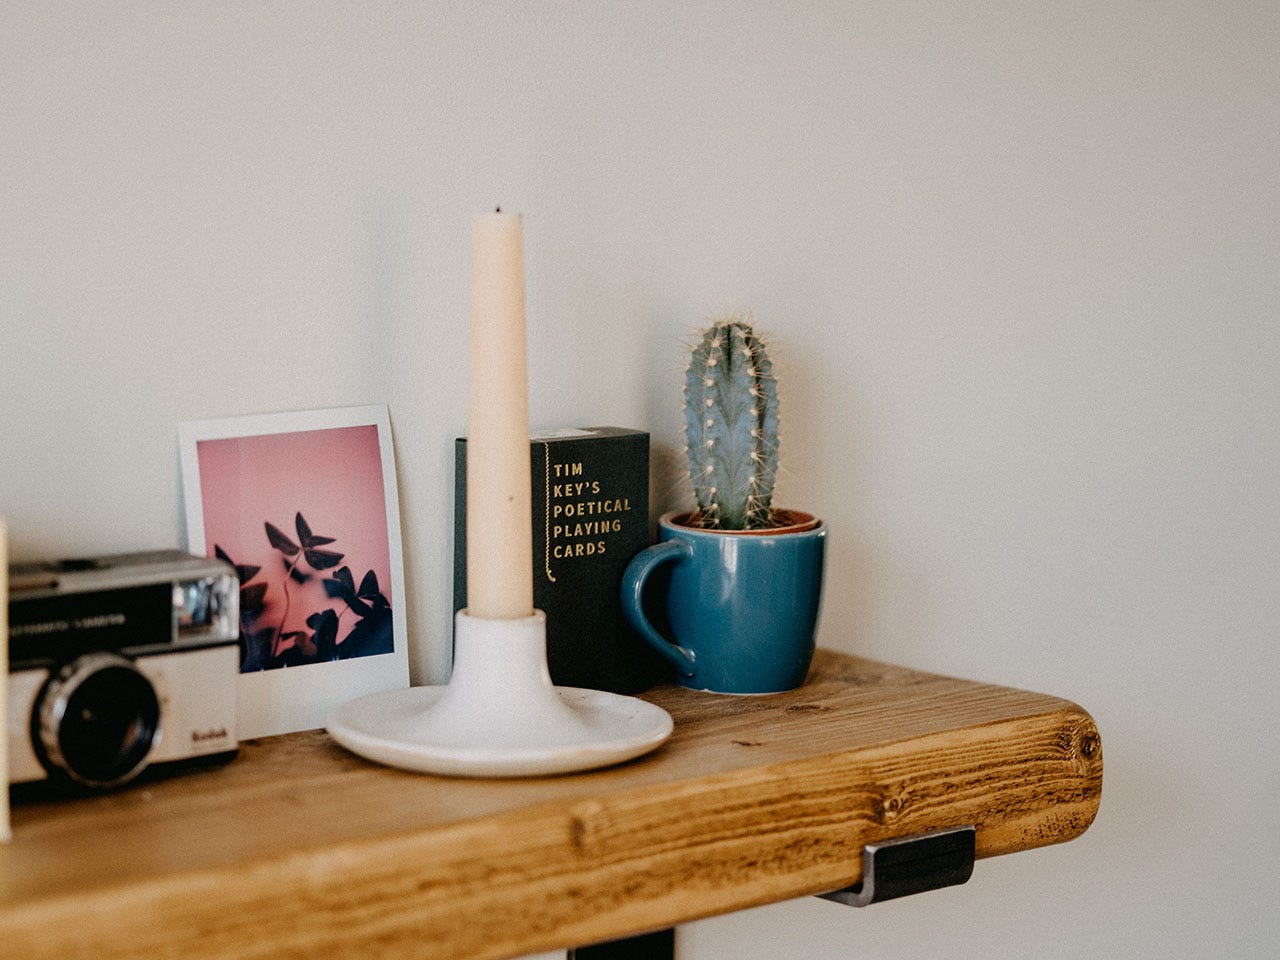 A close-up photo of a wooden bookshelf, on which sits a camera, a polaroid photo of a plant, a candle, a cactus in a blue mug, and 'Tim Key's Poetical Playing Cards'. Photo by Annie Spratt, via Unsplash